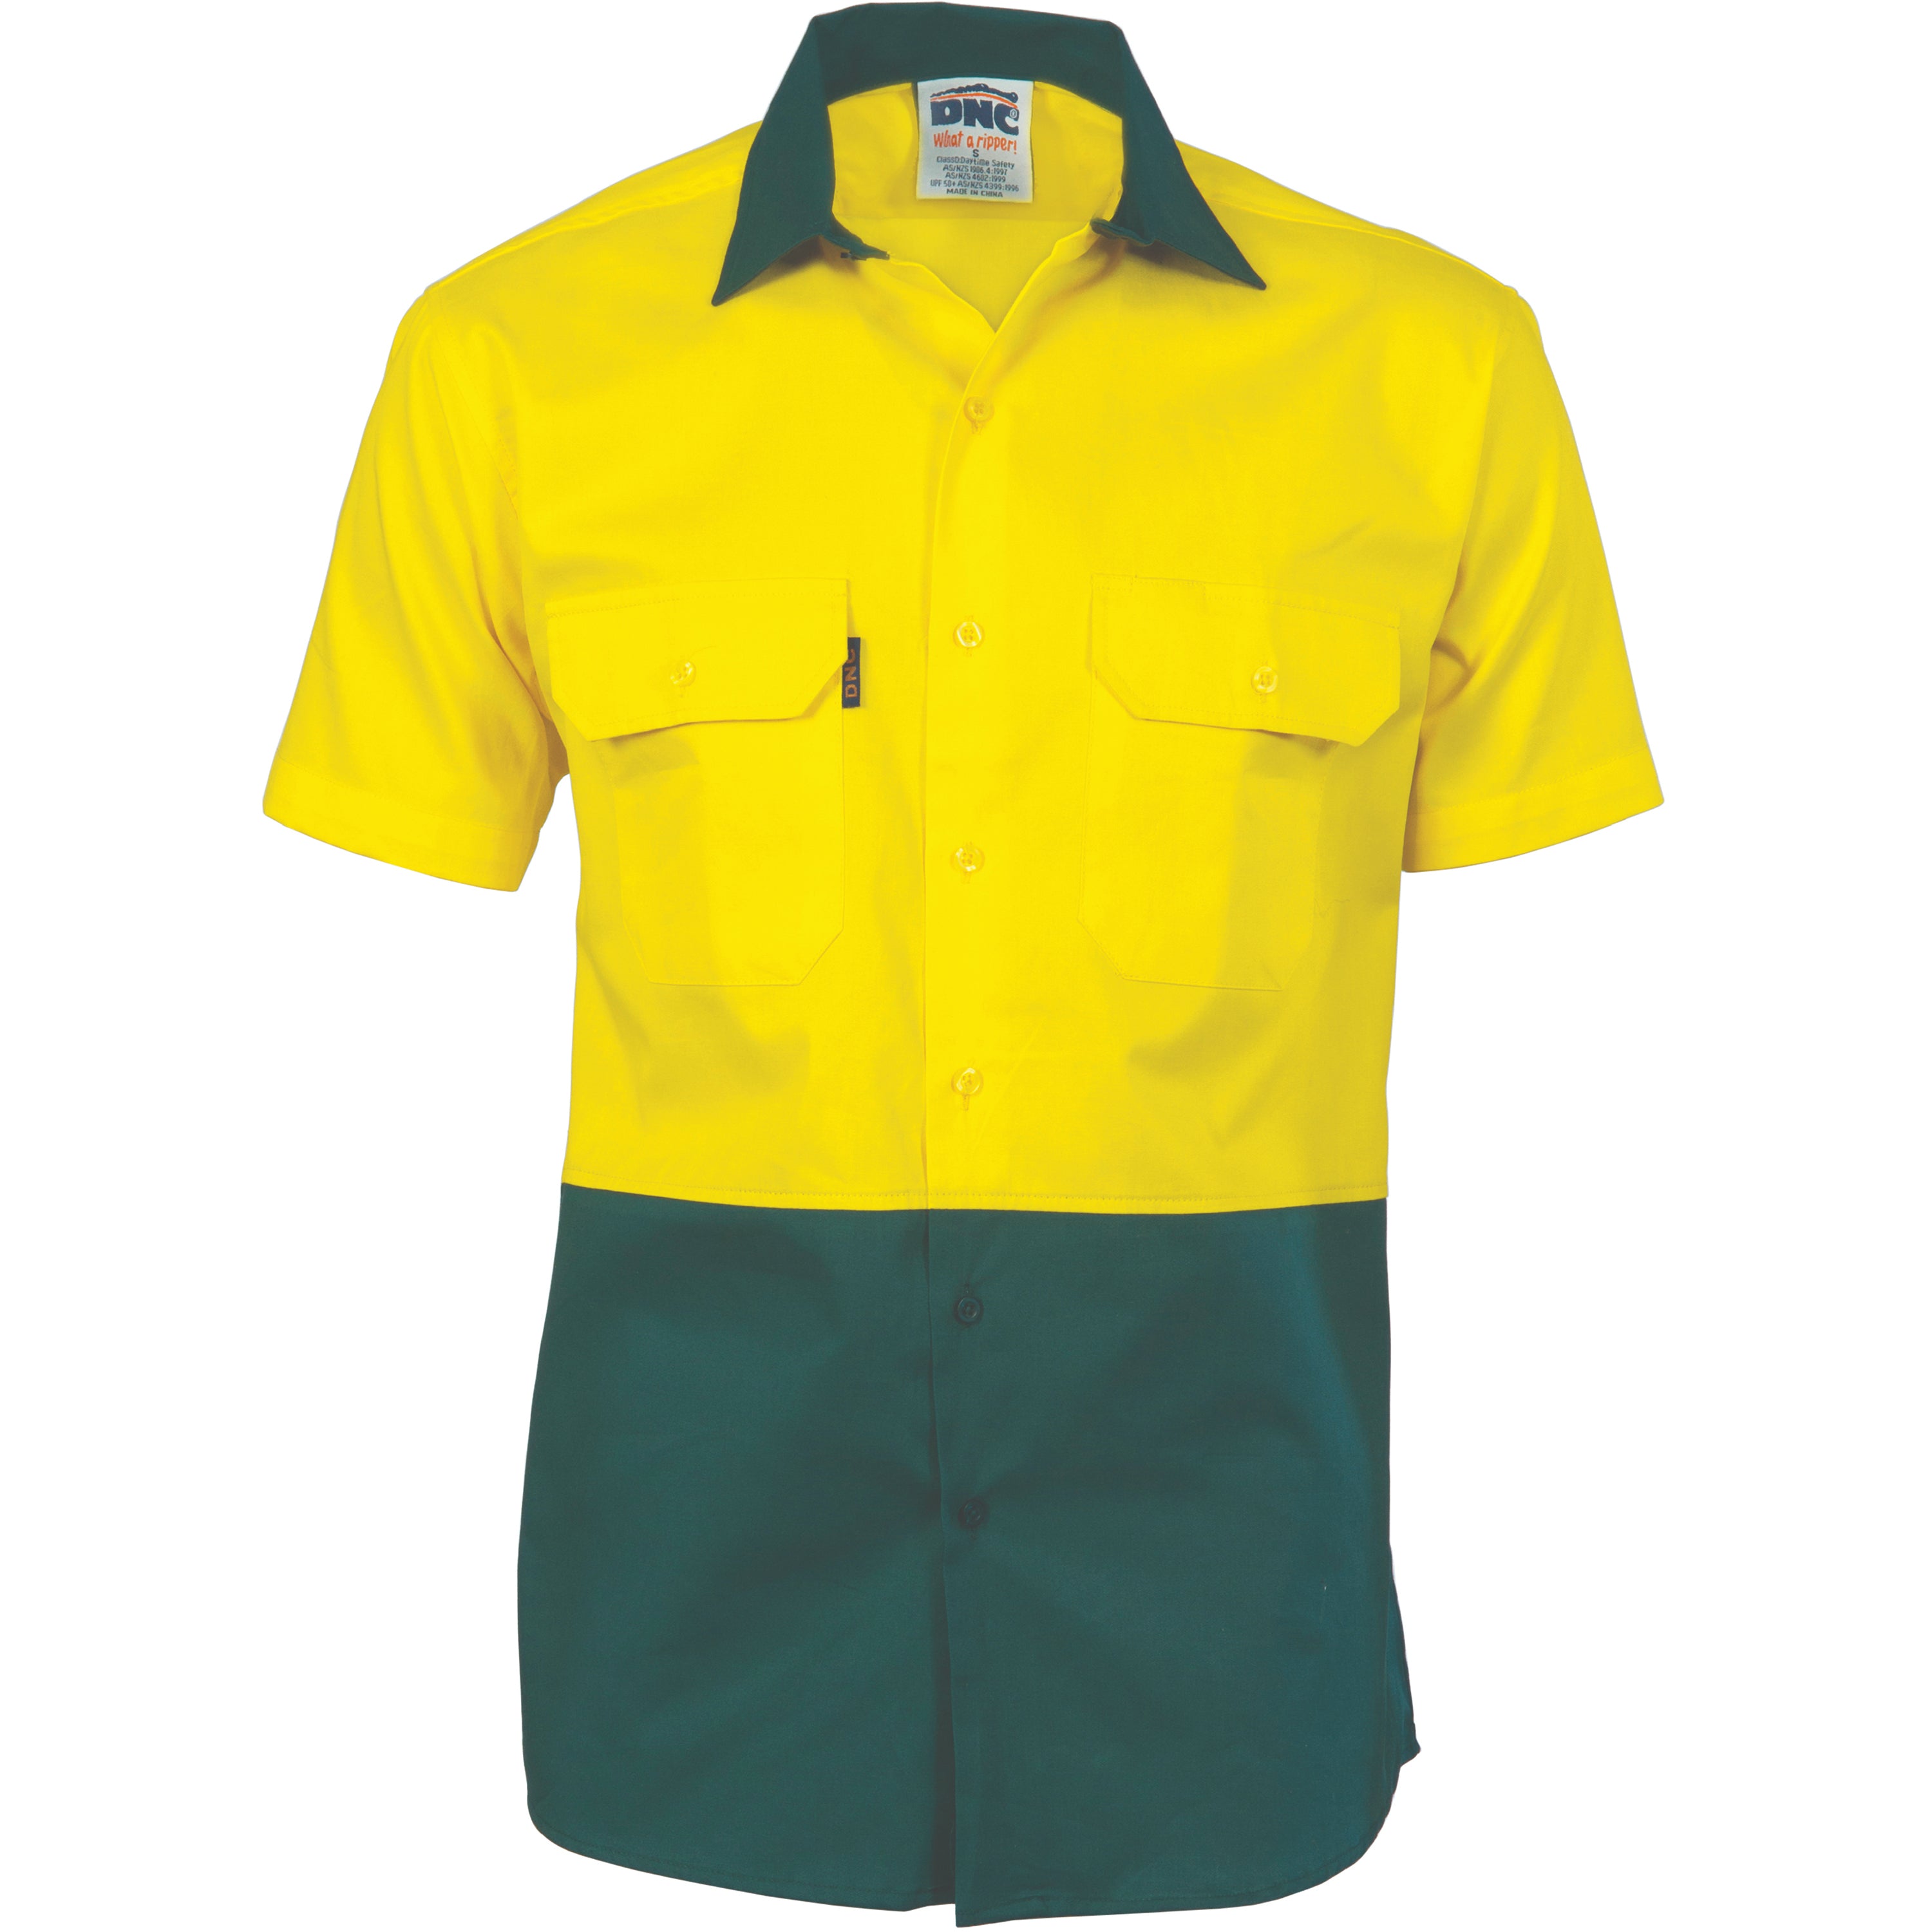 DNC 3831 Hivis Two Tone S/S Cotton Drill Shirt